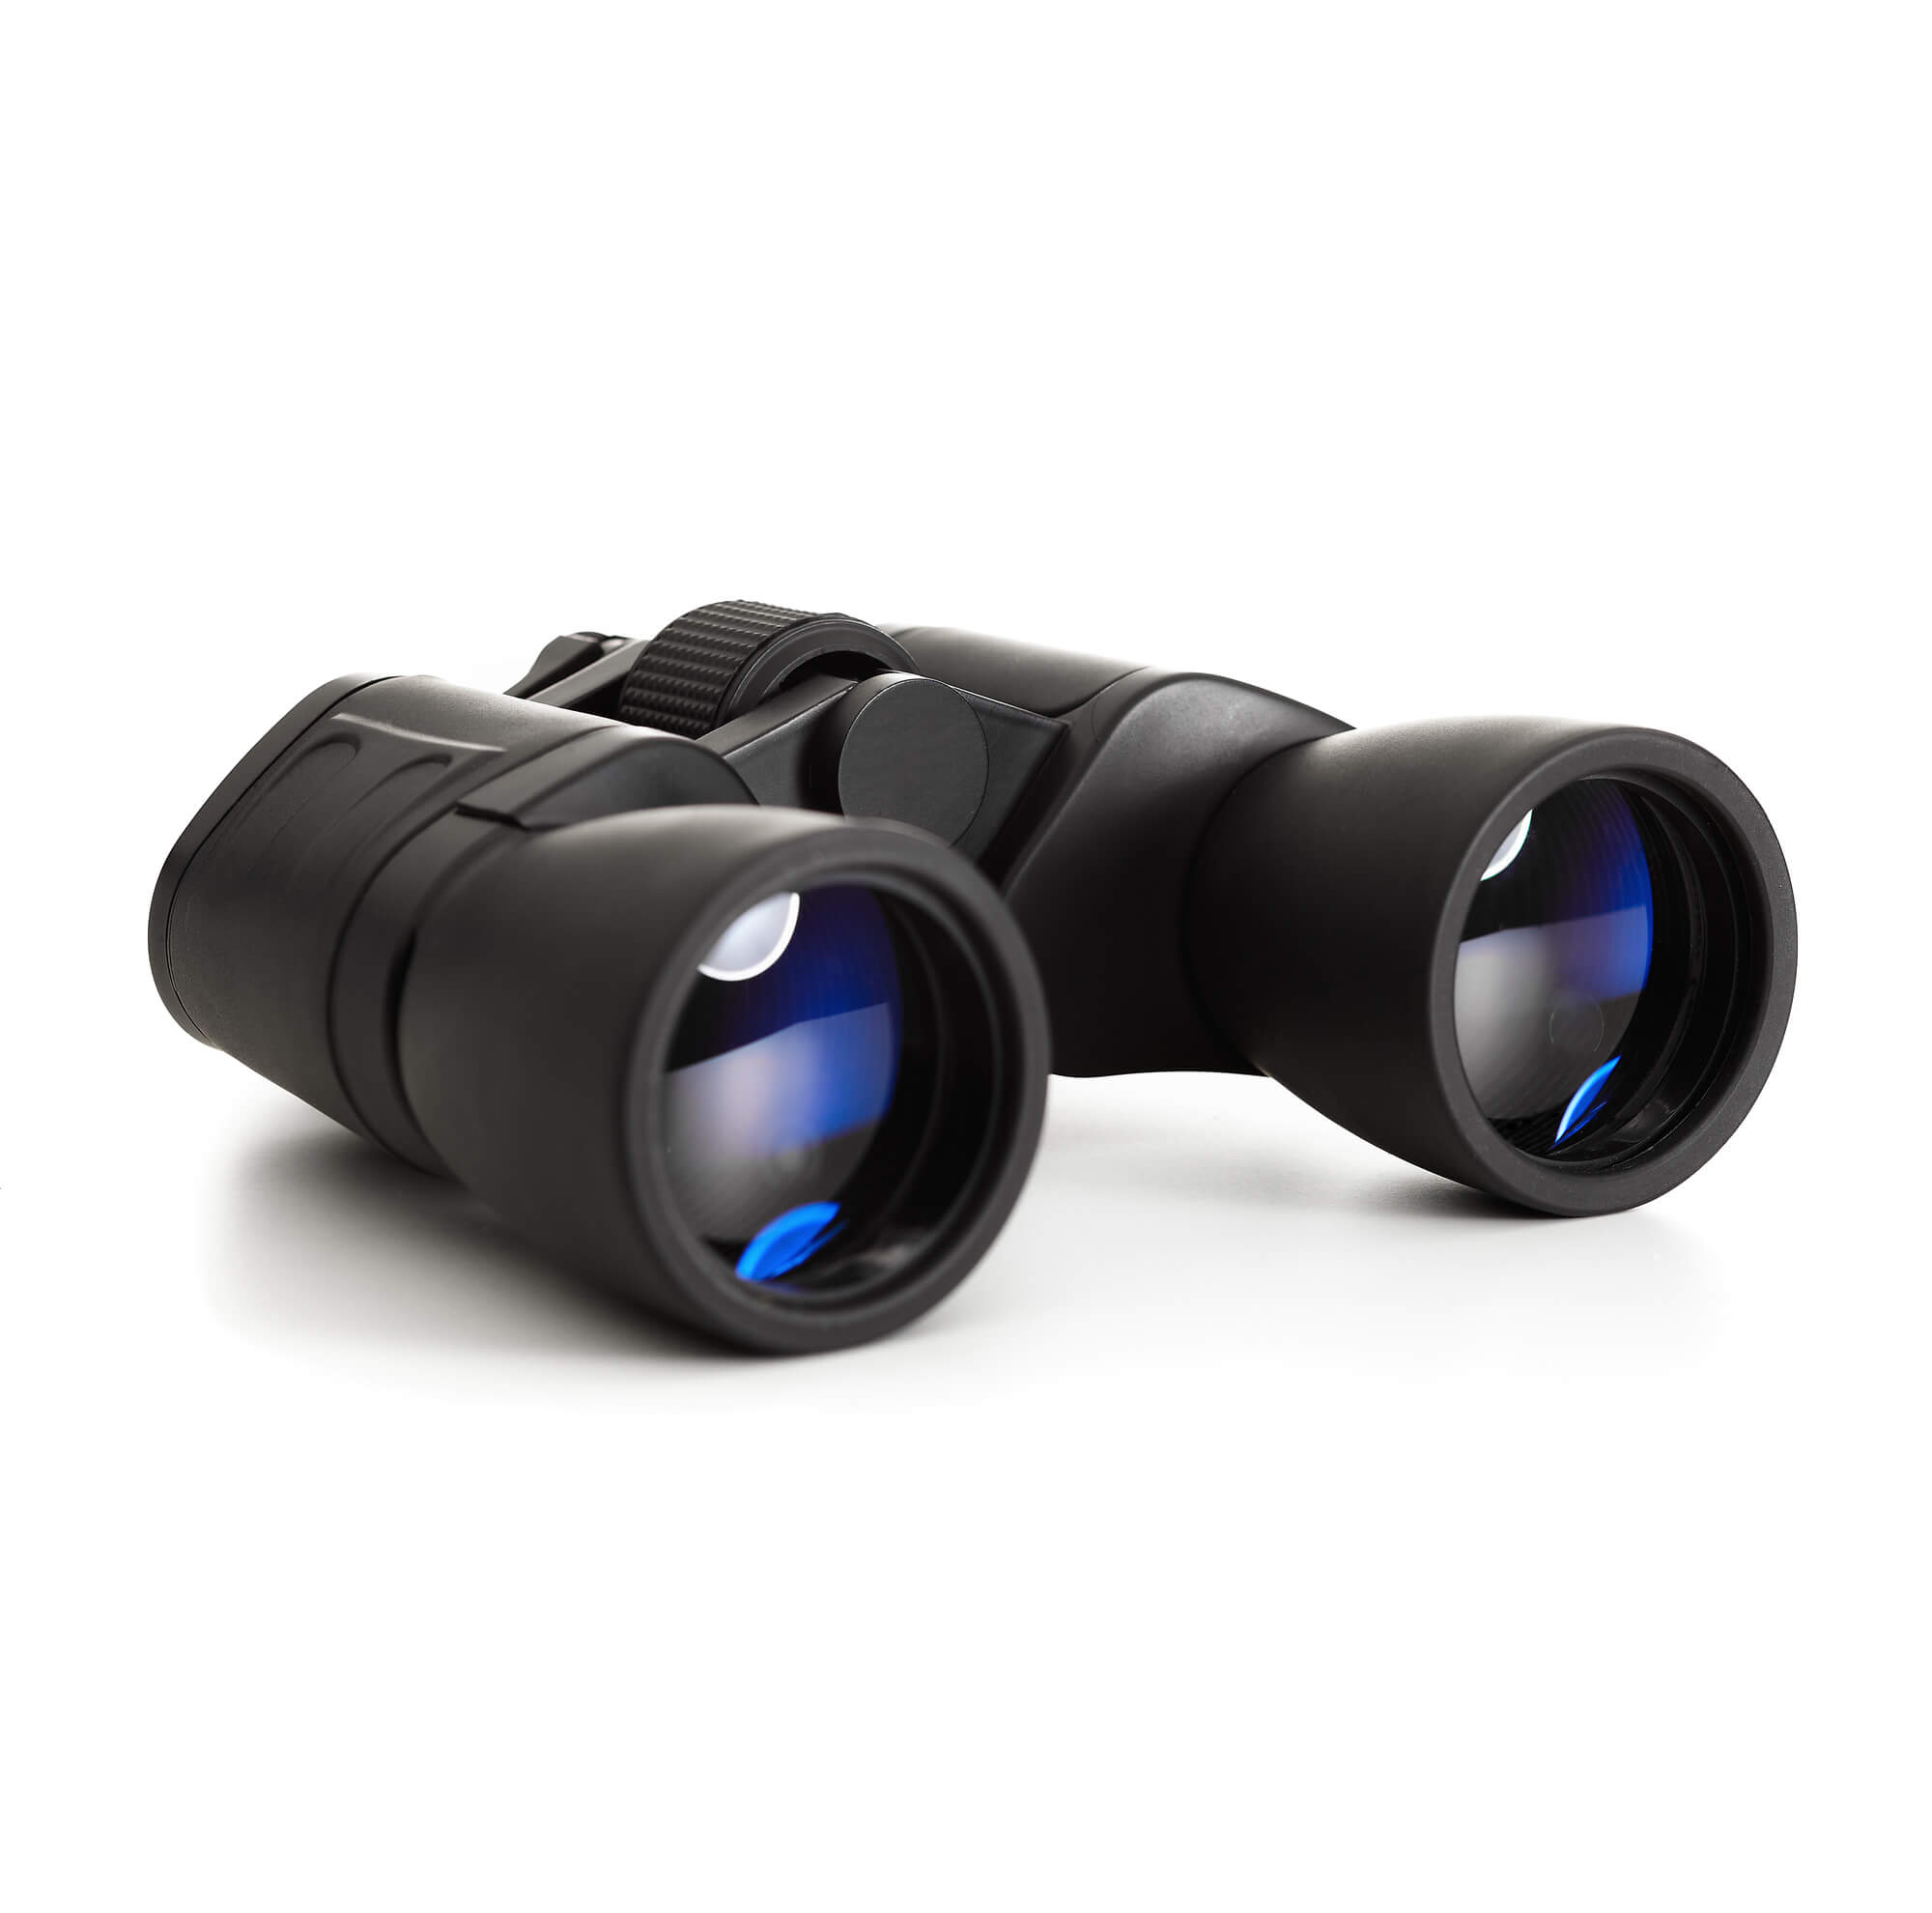 100% Waterproof Super Lightweight Small and Compact with Superior Optical Quality for Hours of Clear and Bright HD Views 8x32 Binoculars for Adults Hiking and Sports Games Ideal for Birdwatching 